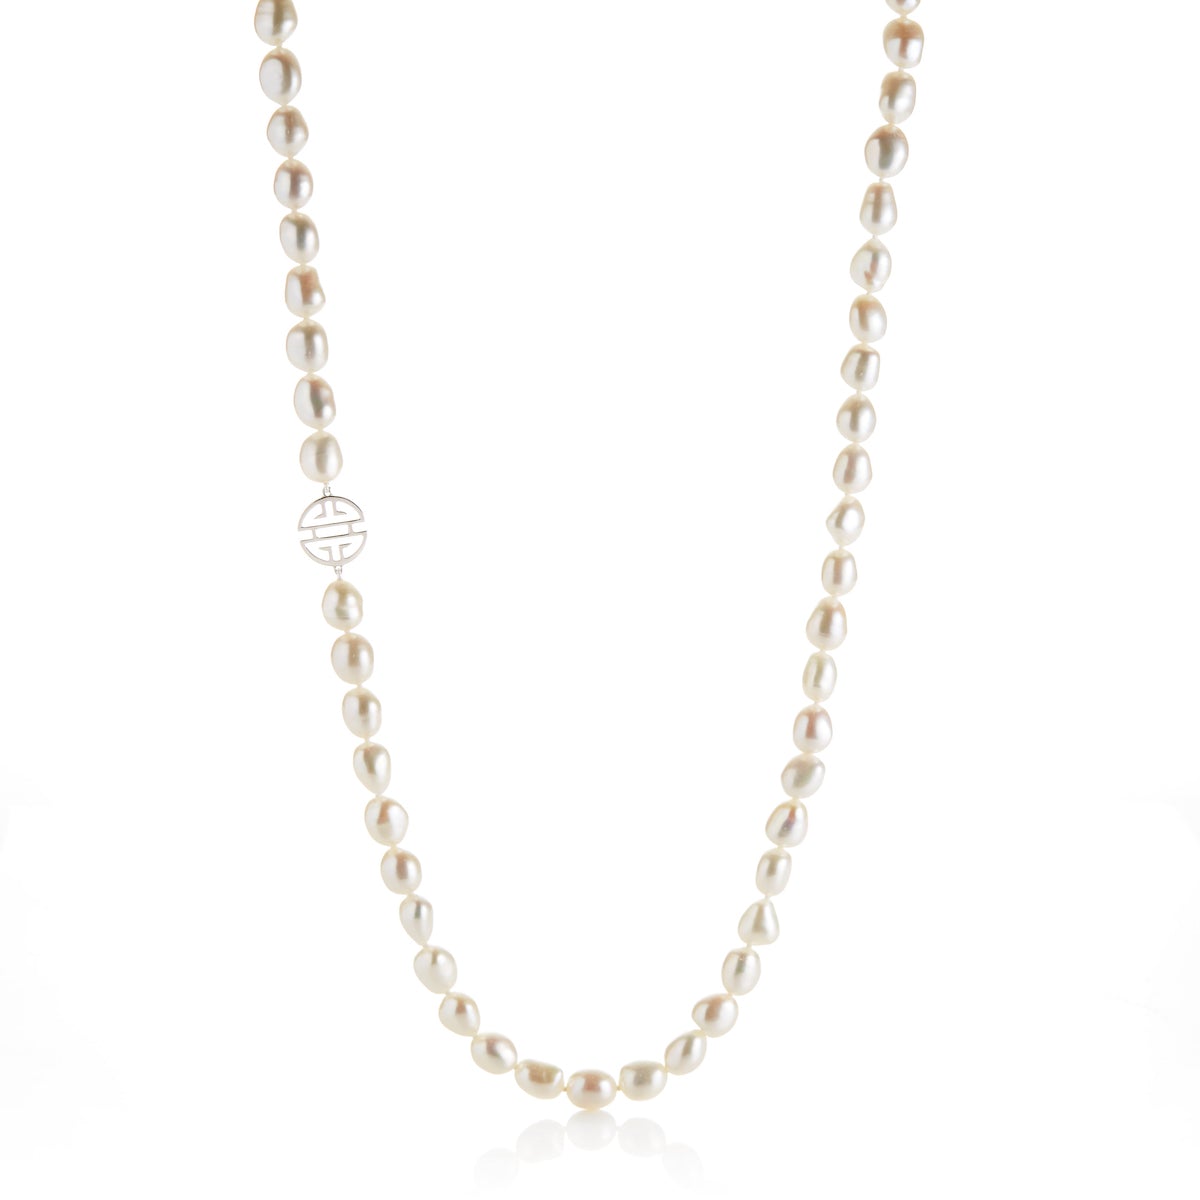 Gump's Signature Baroque Pearl & Silver Shou Rope Necklace